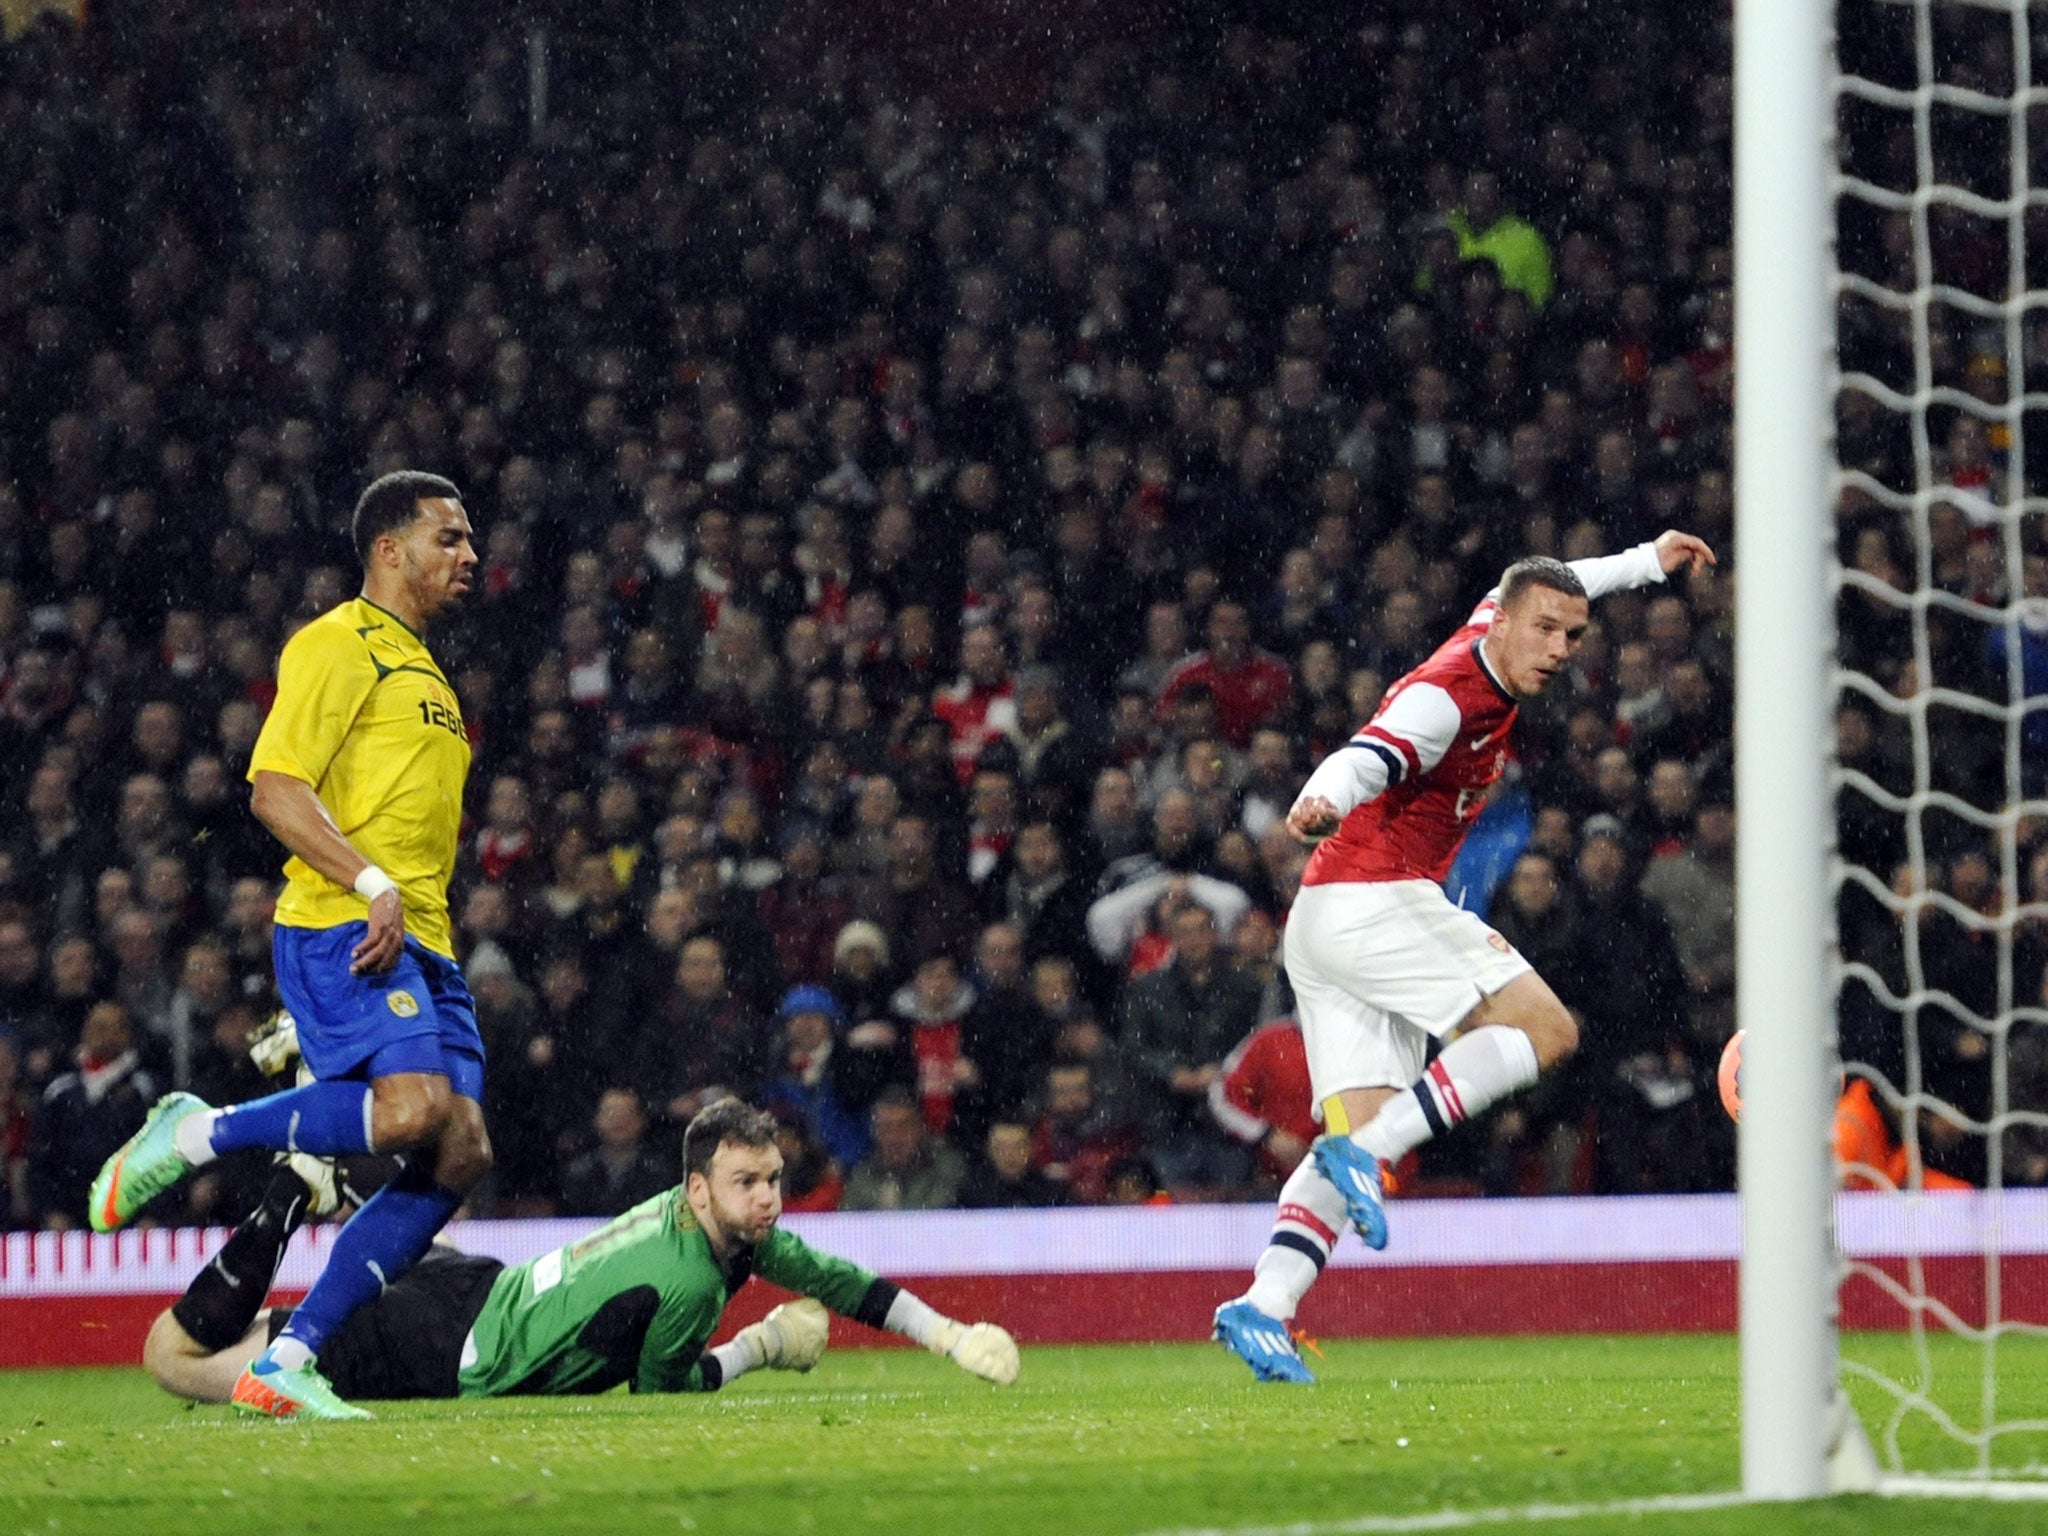 Lukas Podolski clips the ball just inside the post to score Arsenal's first goal